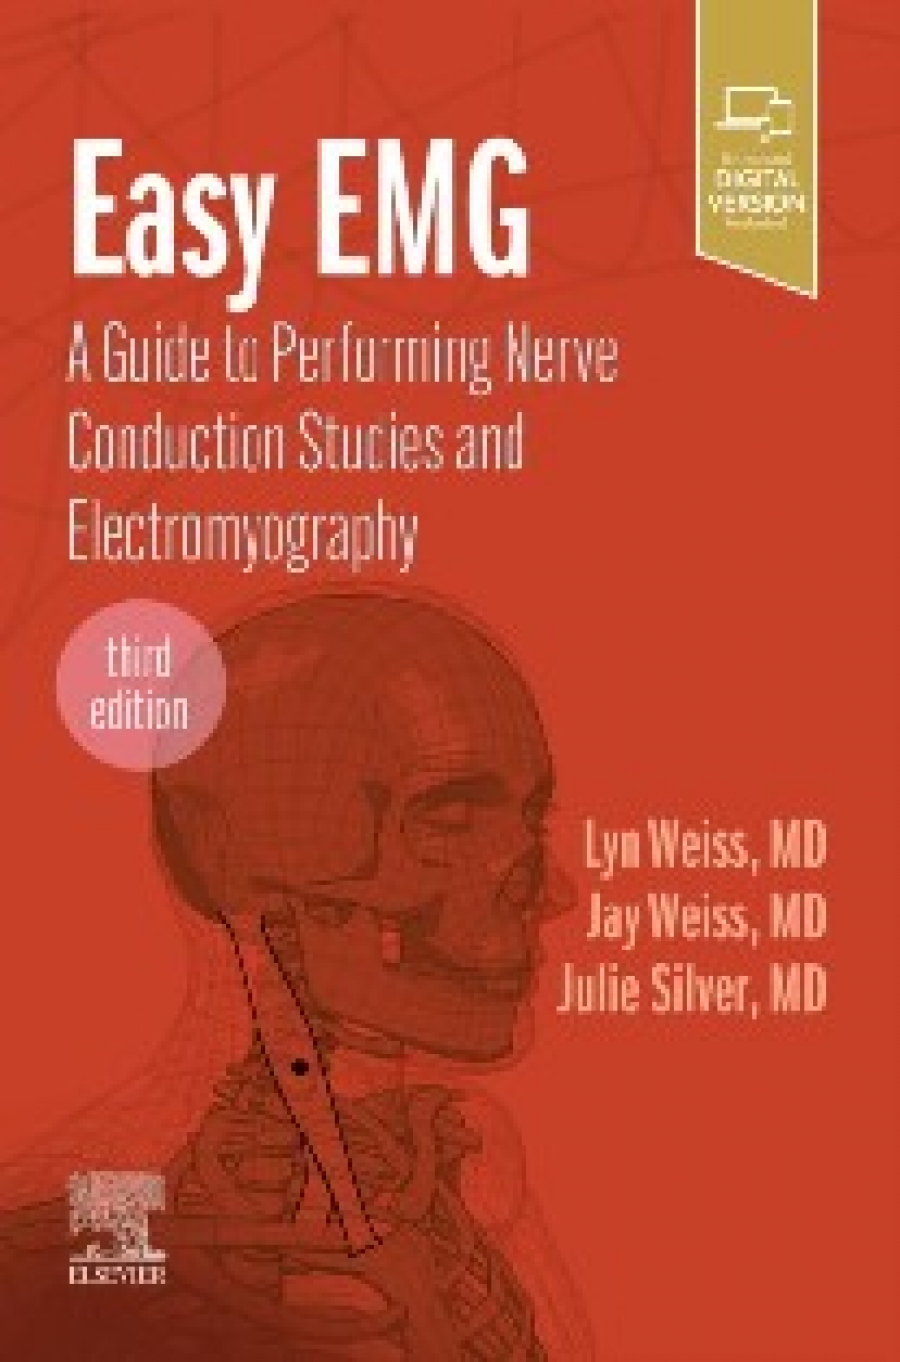 Weiss, Weiss & Silver Easy EMG, A Guide to Performing Nerve Conduction Studies and Electromyography, 3rd Edition 